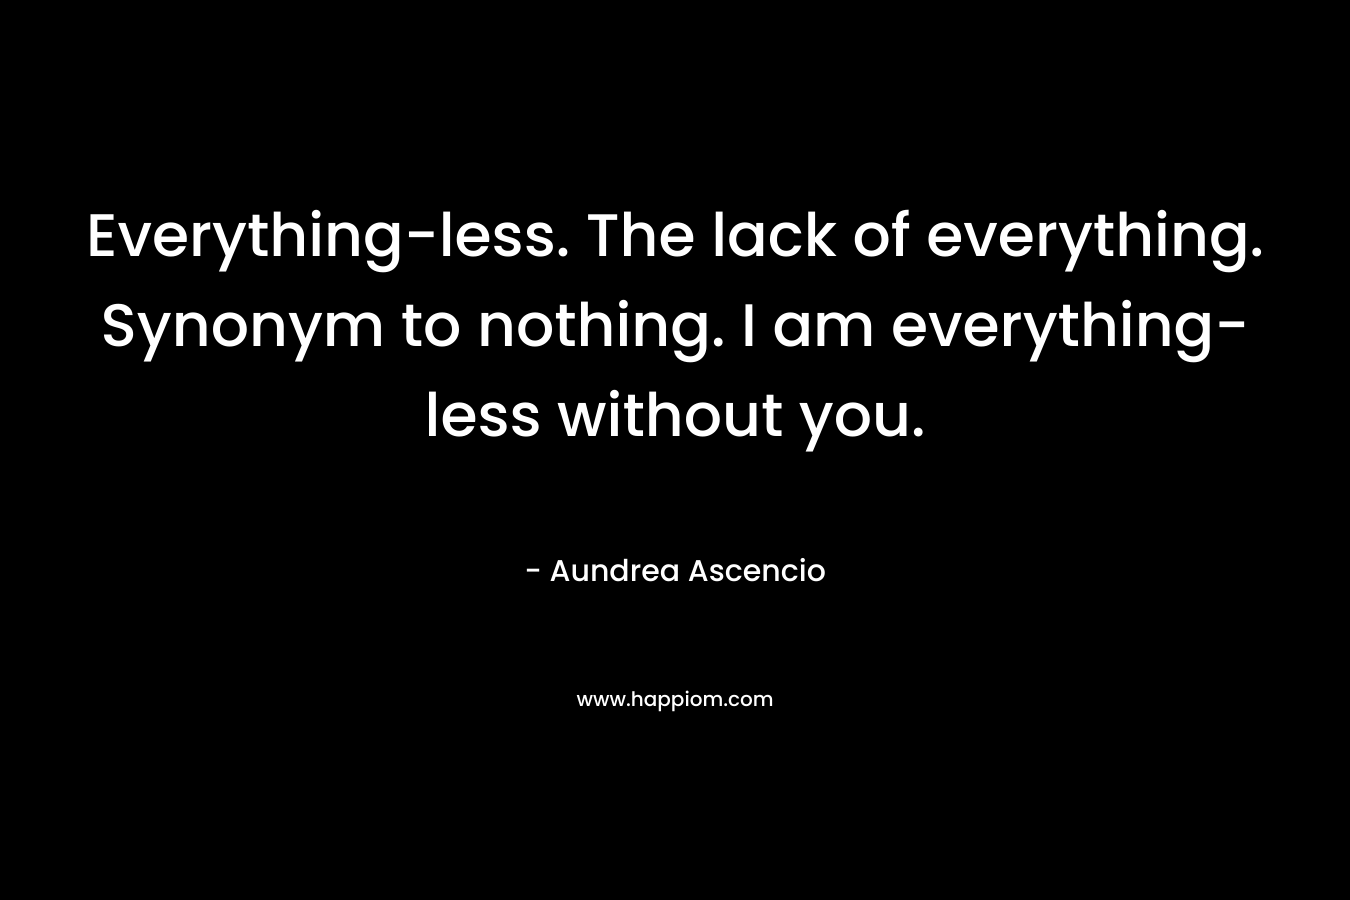 Everything-less. The lack of everything. Synonym to nothing. I am everything-less without you.